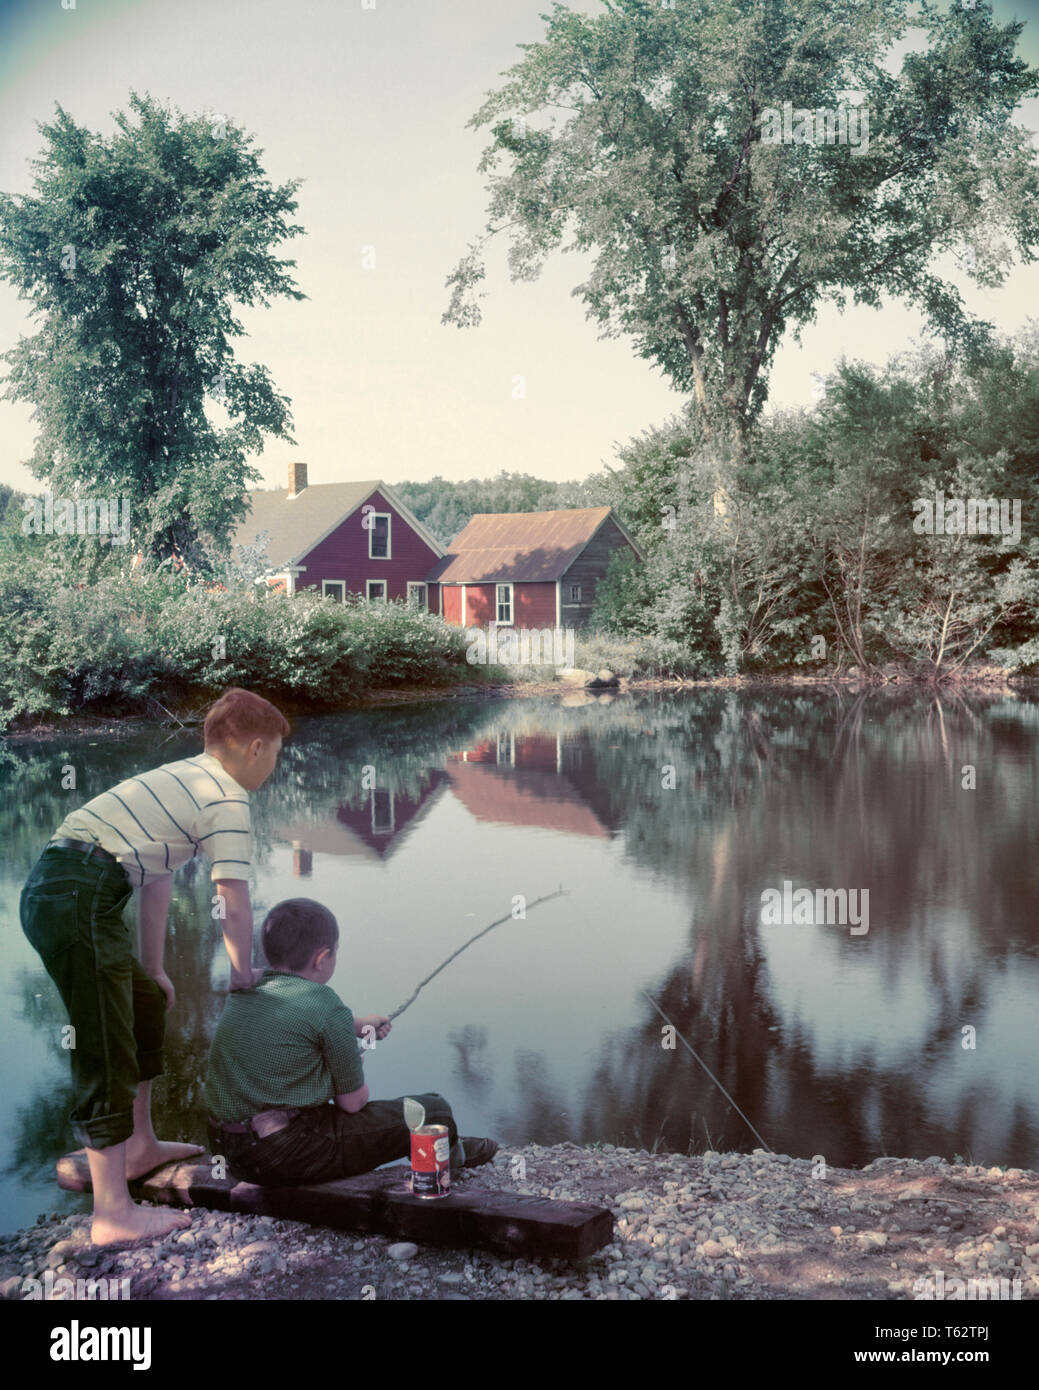 1950s BACK VIEW 2 BOYS FISHING IN FARM POND BAREFOOTED WITH CAN OF WORMS - ka566 HAR001 HARS RECREATION PASTIME PAST SIBLING FRIENDLY ANGLING BAREFOOTED JUVENILES PRE-TEEN PRE-TEEN BOY SERENE TOGETHERNESS BUDDIES CAUCASIAN ETHNICITY HAR001 OLD FASHIONED Stock Photo